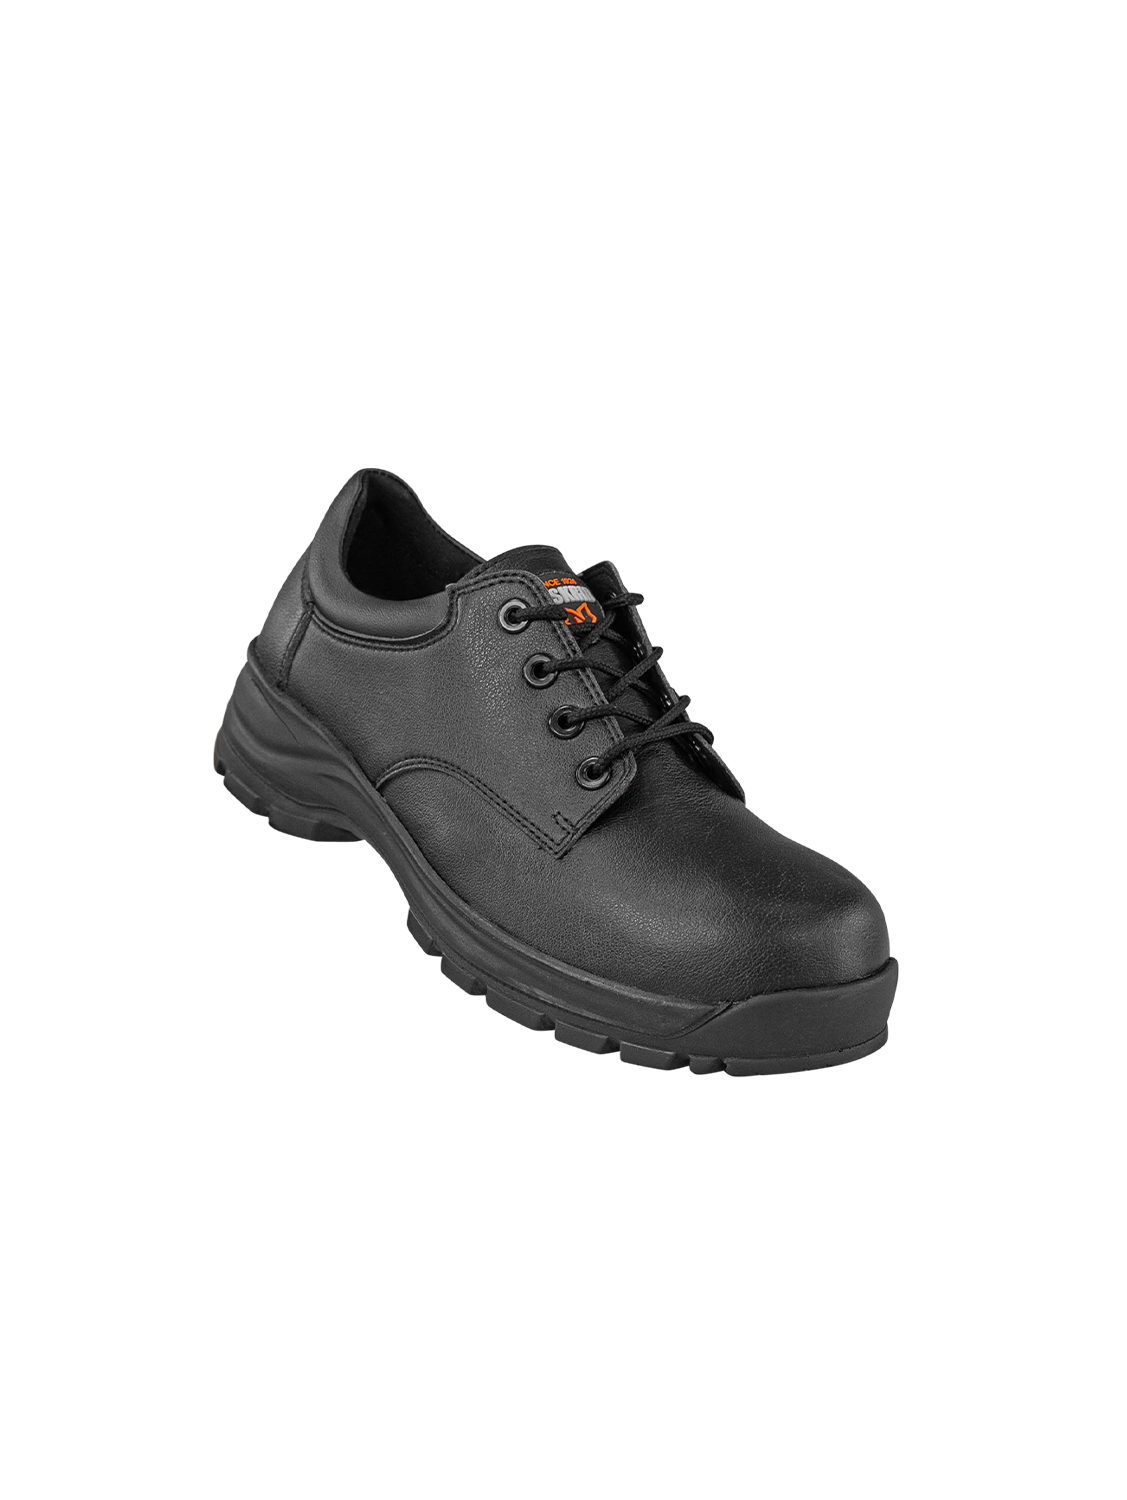 Products by NESKRID - Work- and Safety Footwear